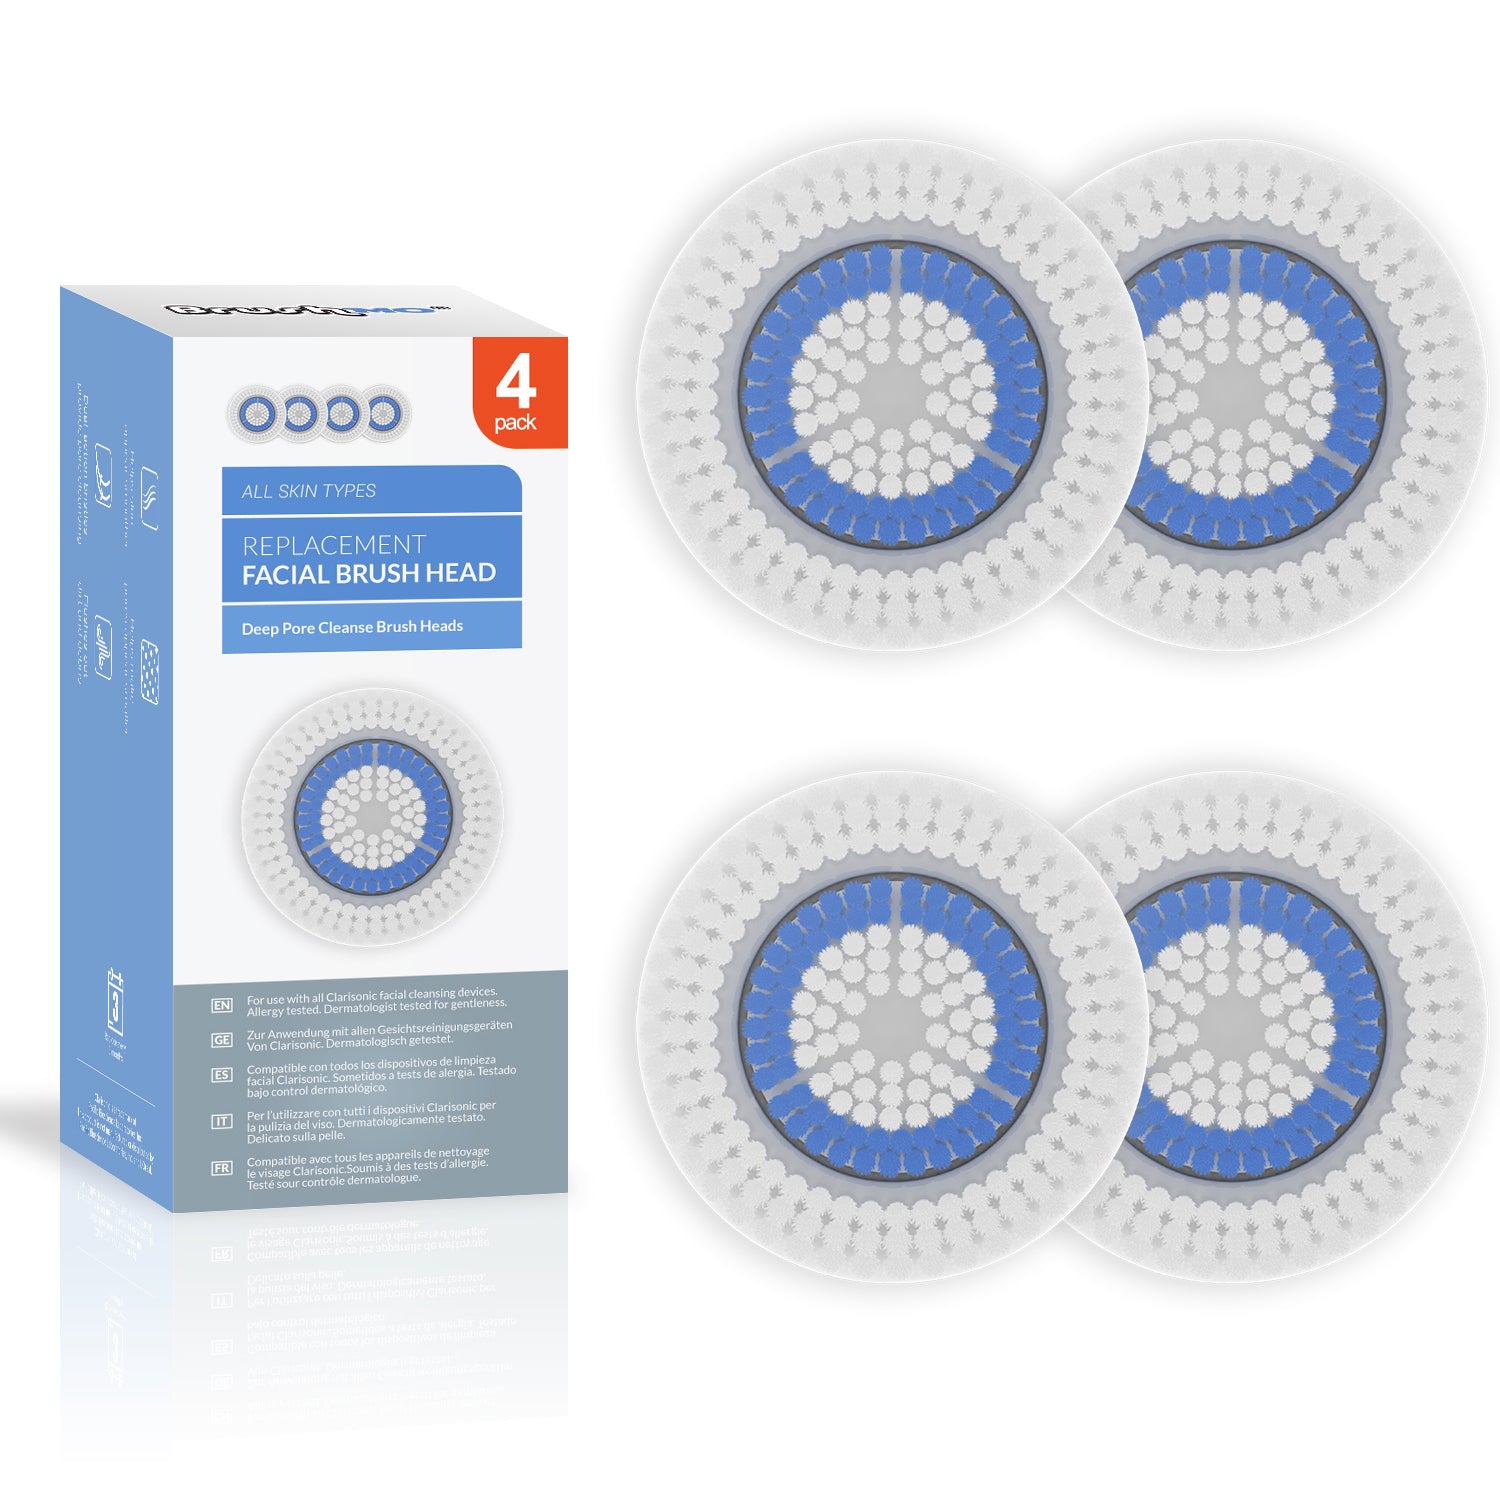 Replacement Facial Cleansing Brush Heads for Clarisonic, Deep Pore, 4 Pack